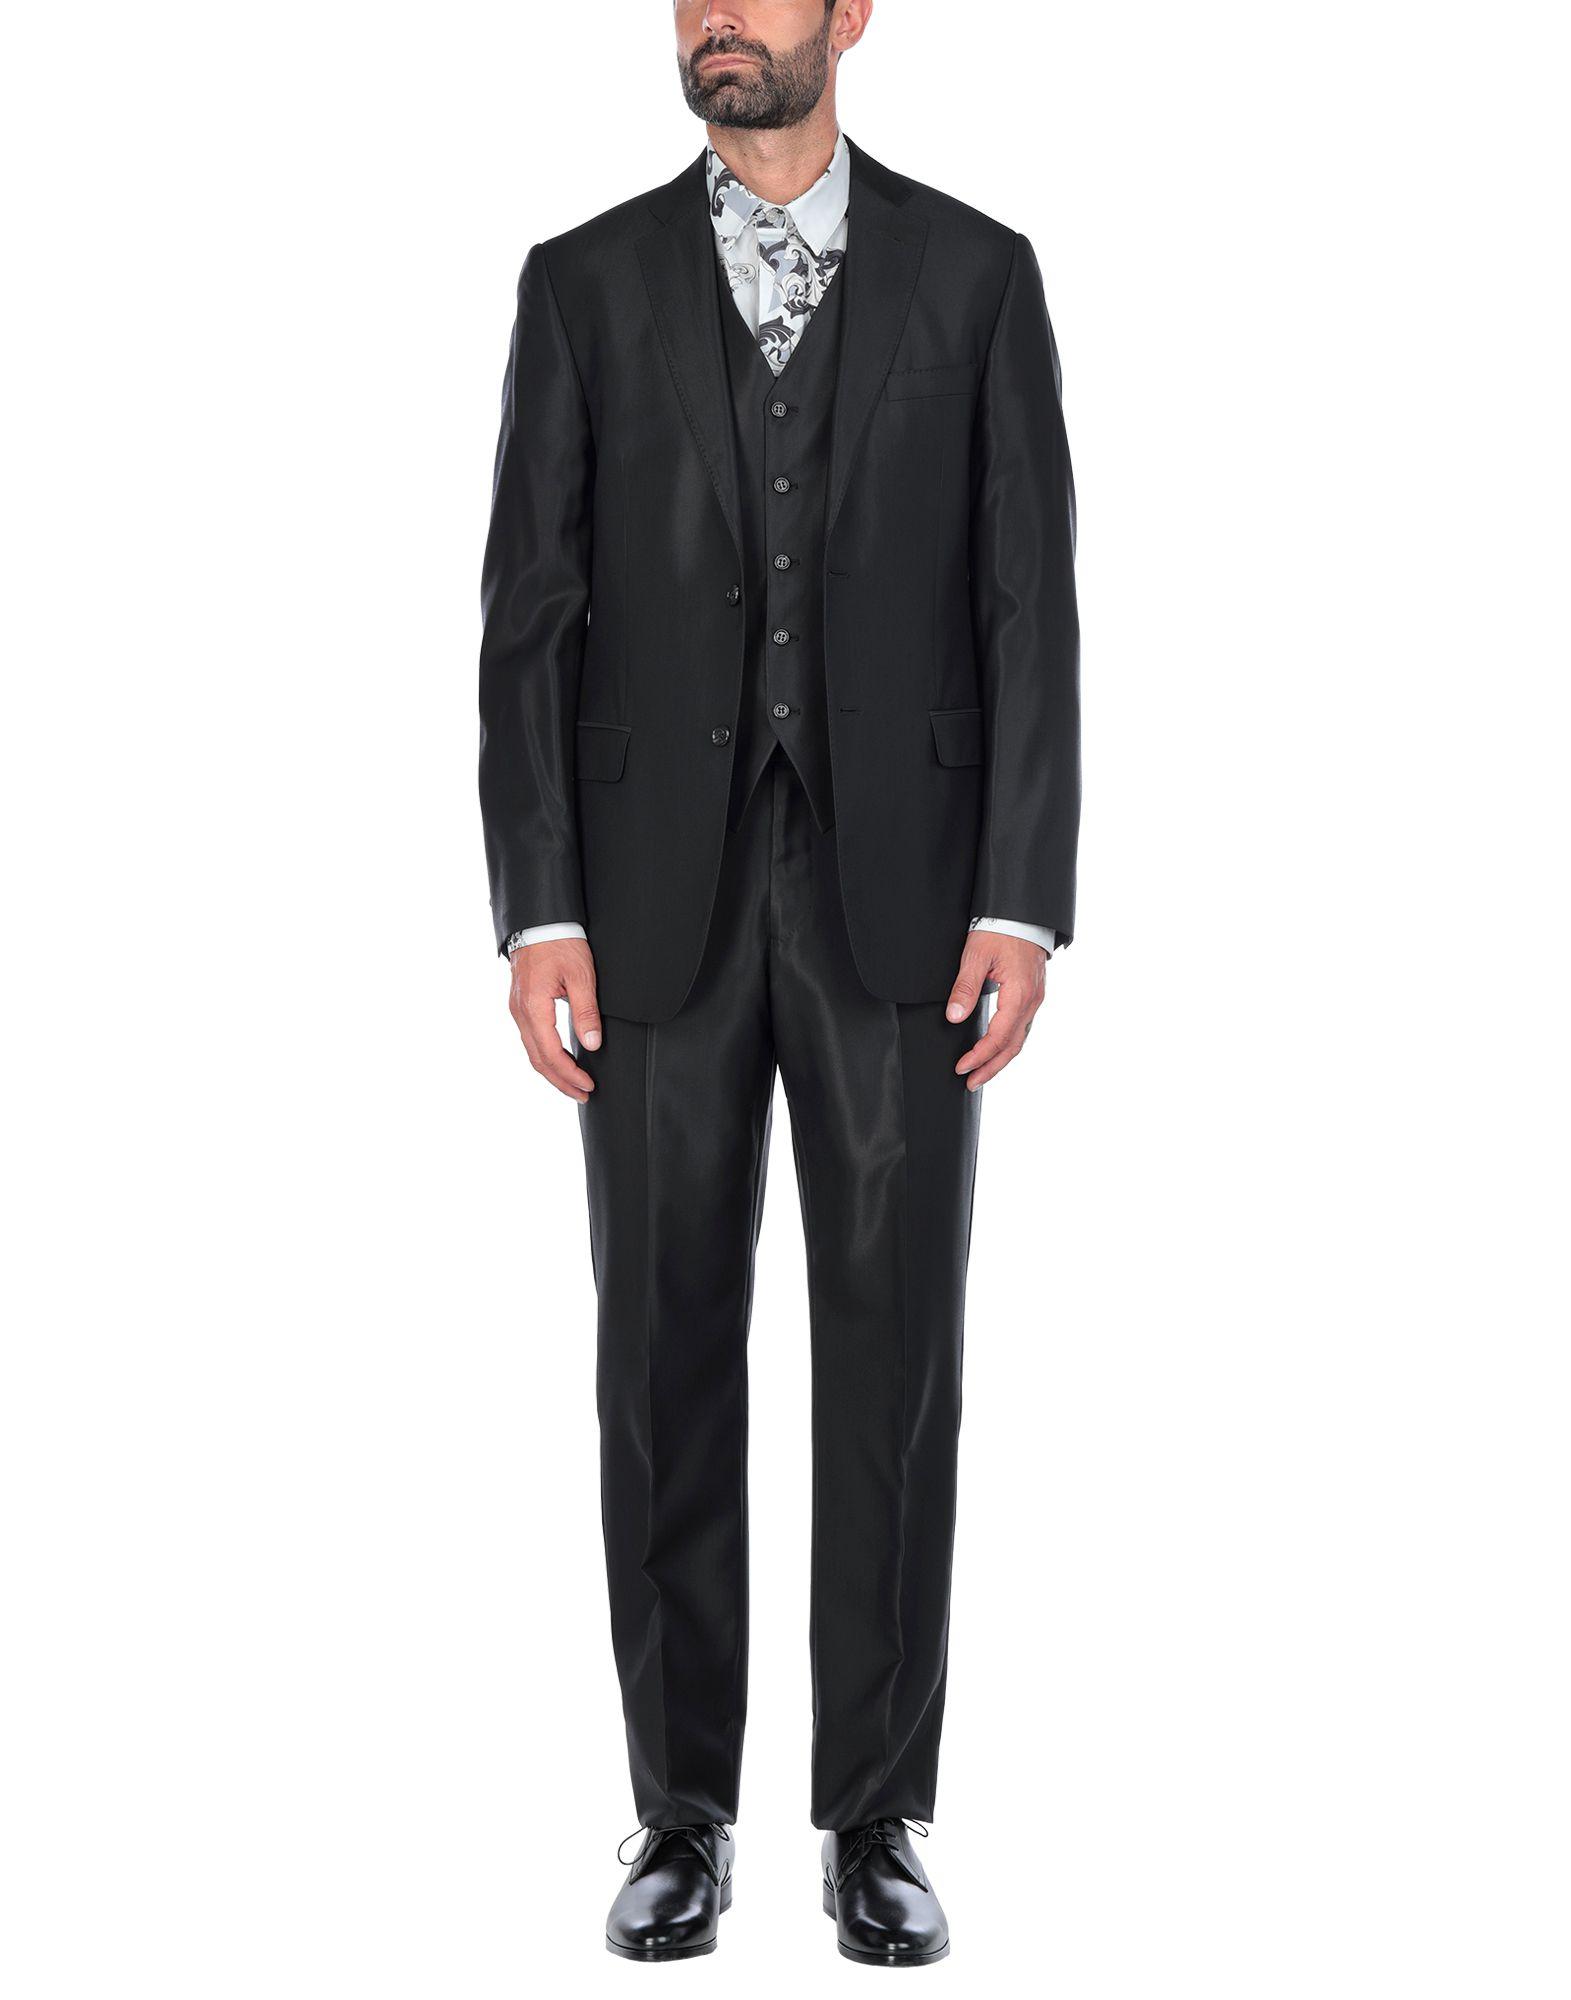 Versace Synthetic Suit in Black for Men - Lyst